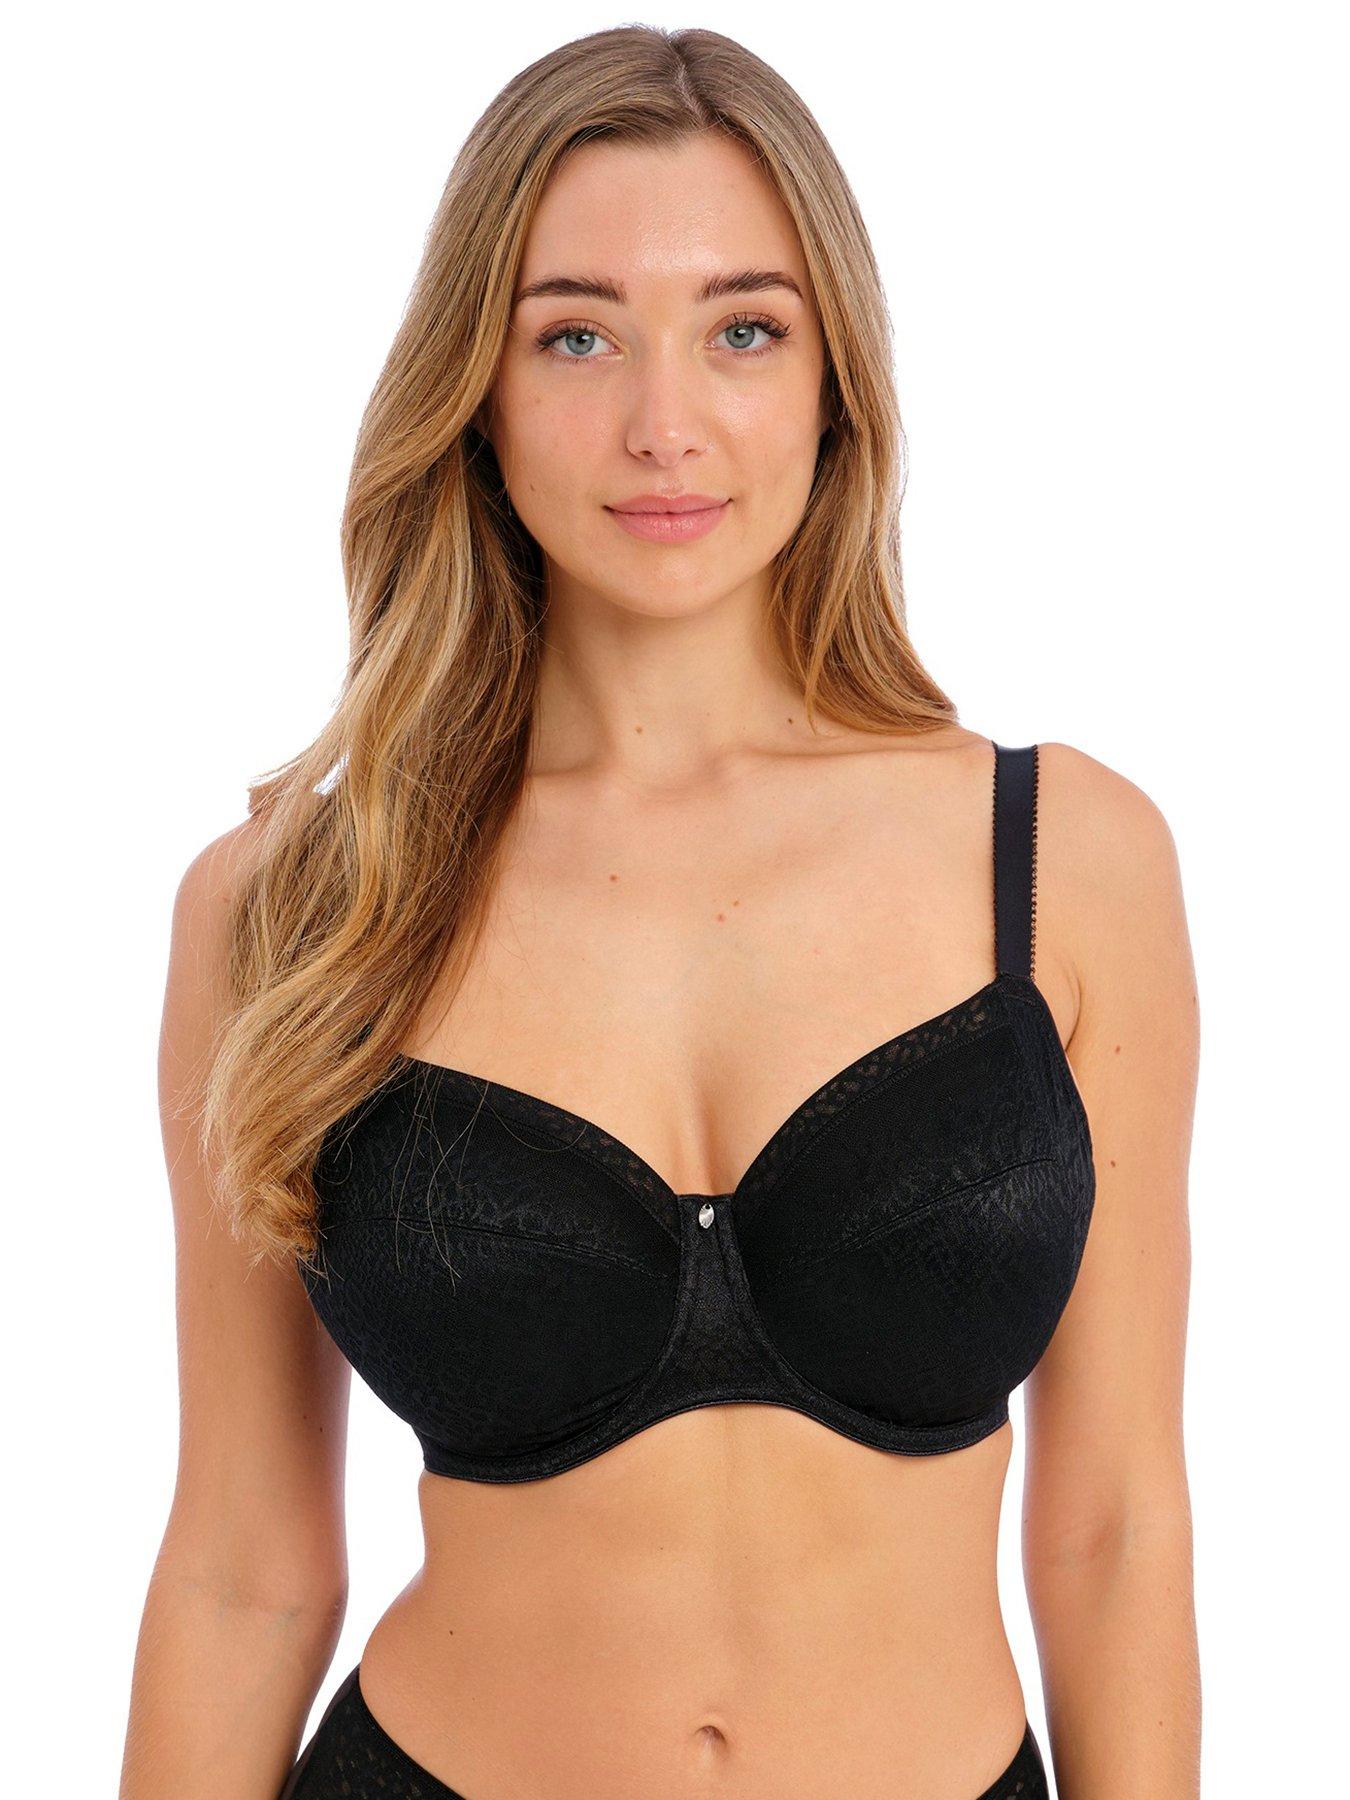 Curvy Kate - Boost Me Up Padded Balcony - CK027106 - The Bra Spa